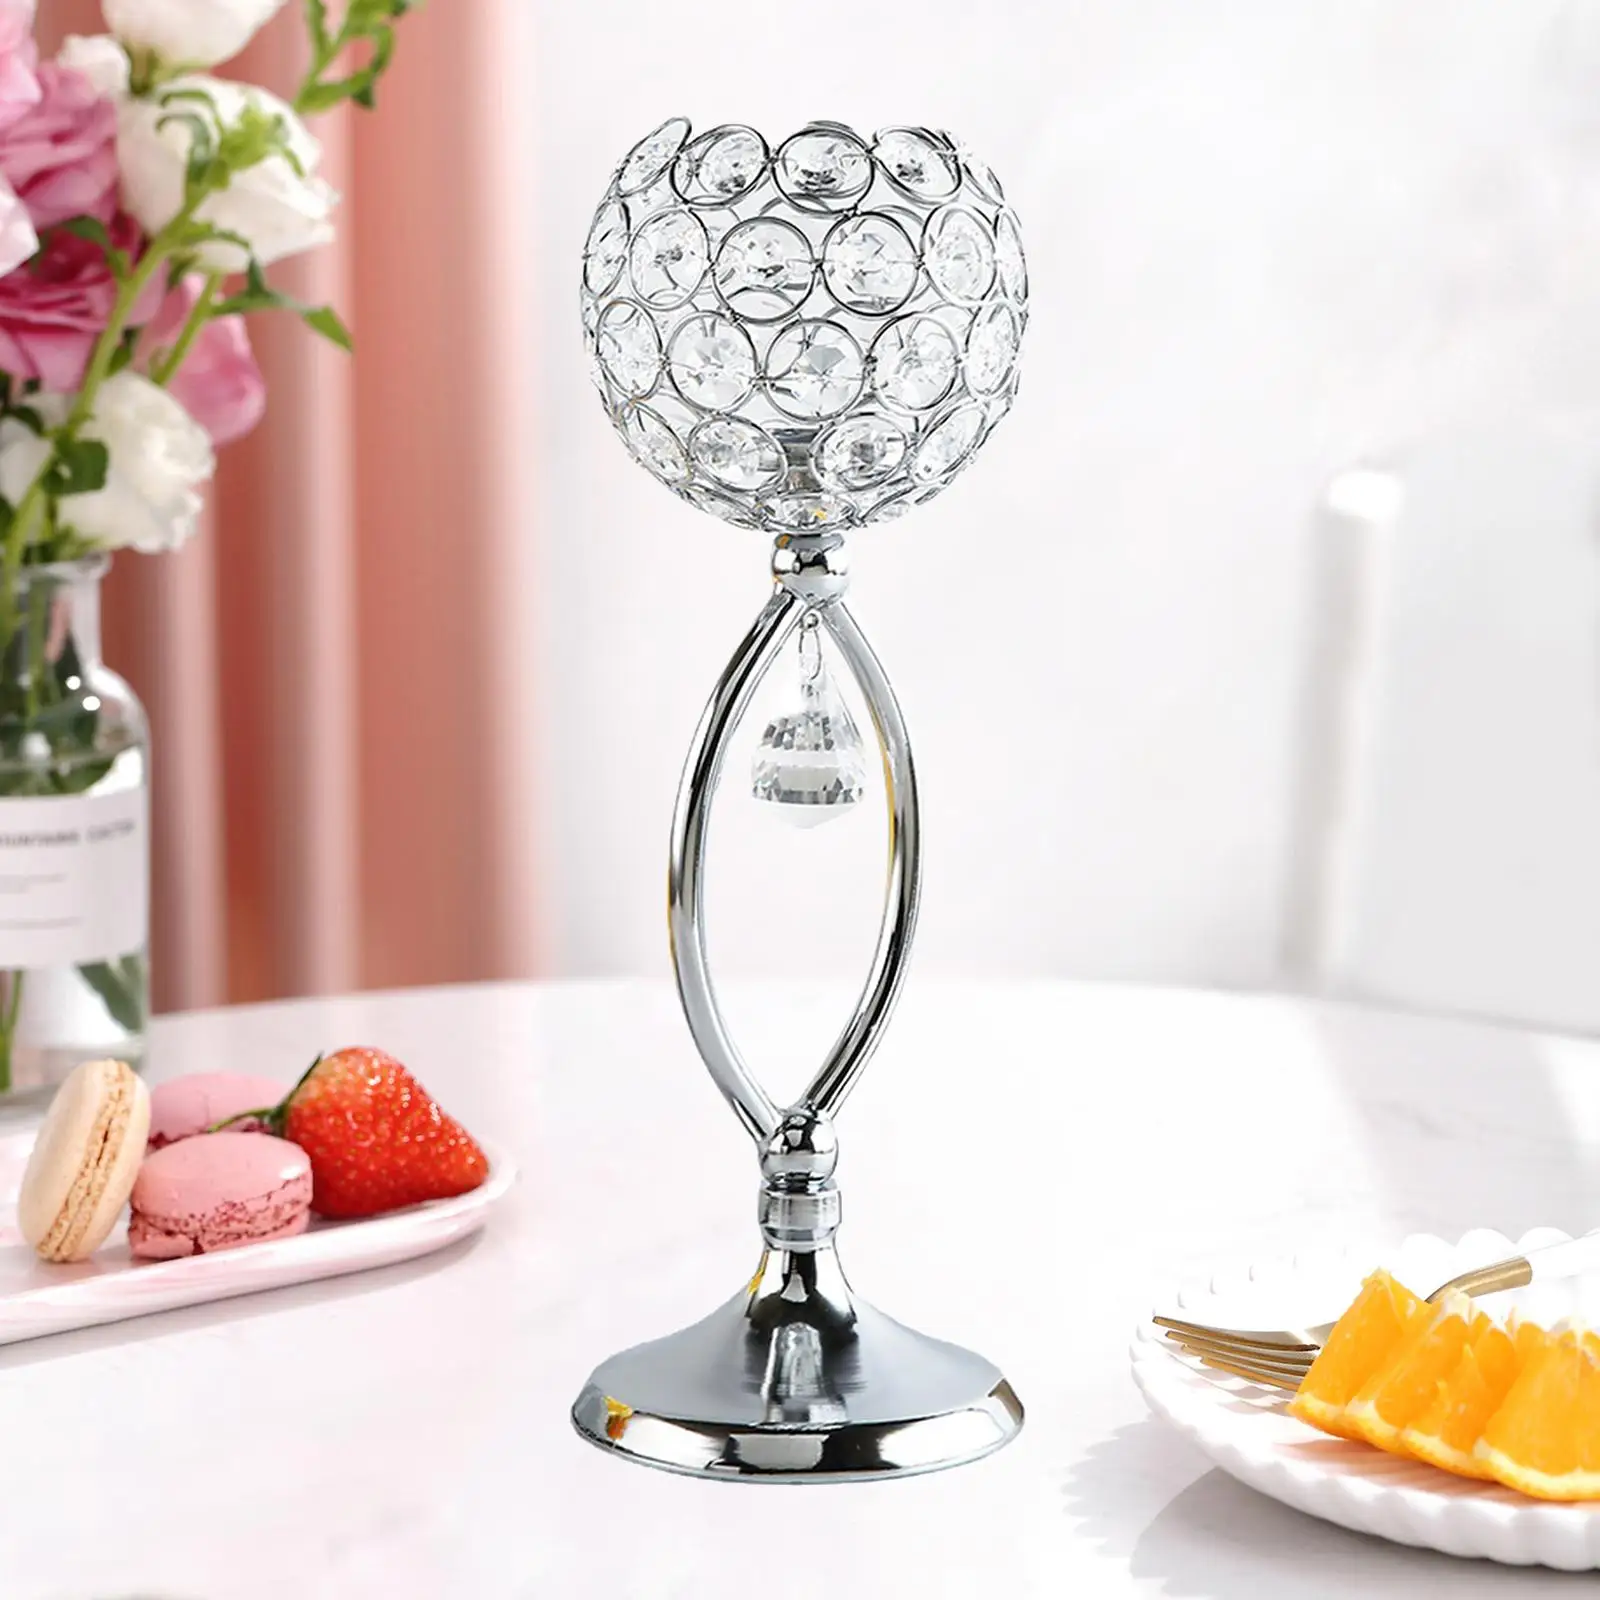 Crystalabrum for Decorative Items, Candle Shelf for Party, Household Accessories, Durable